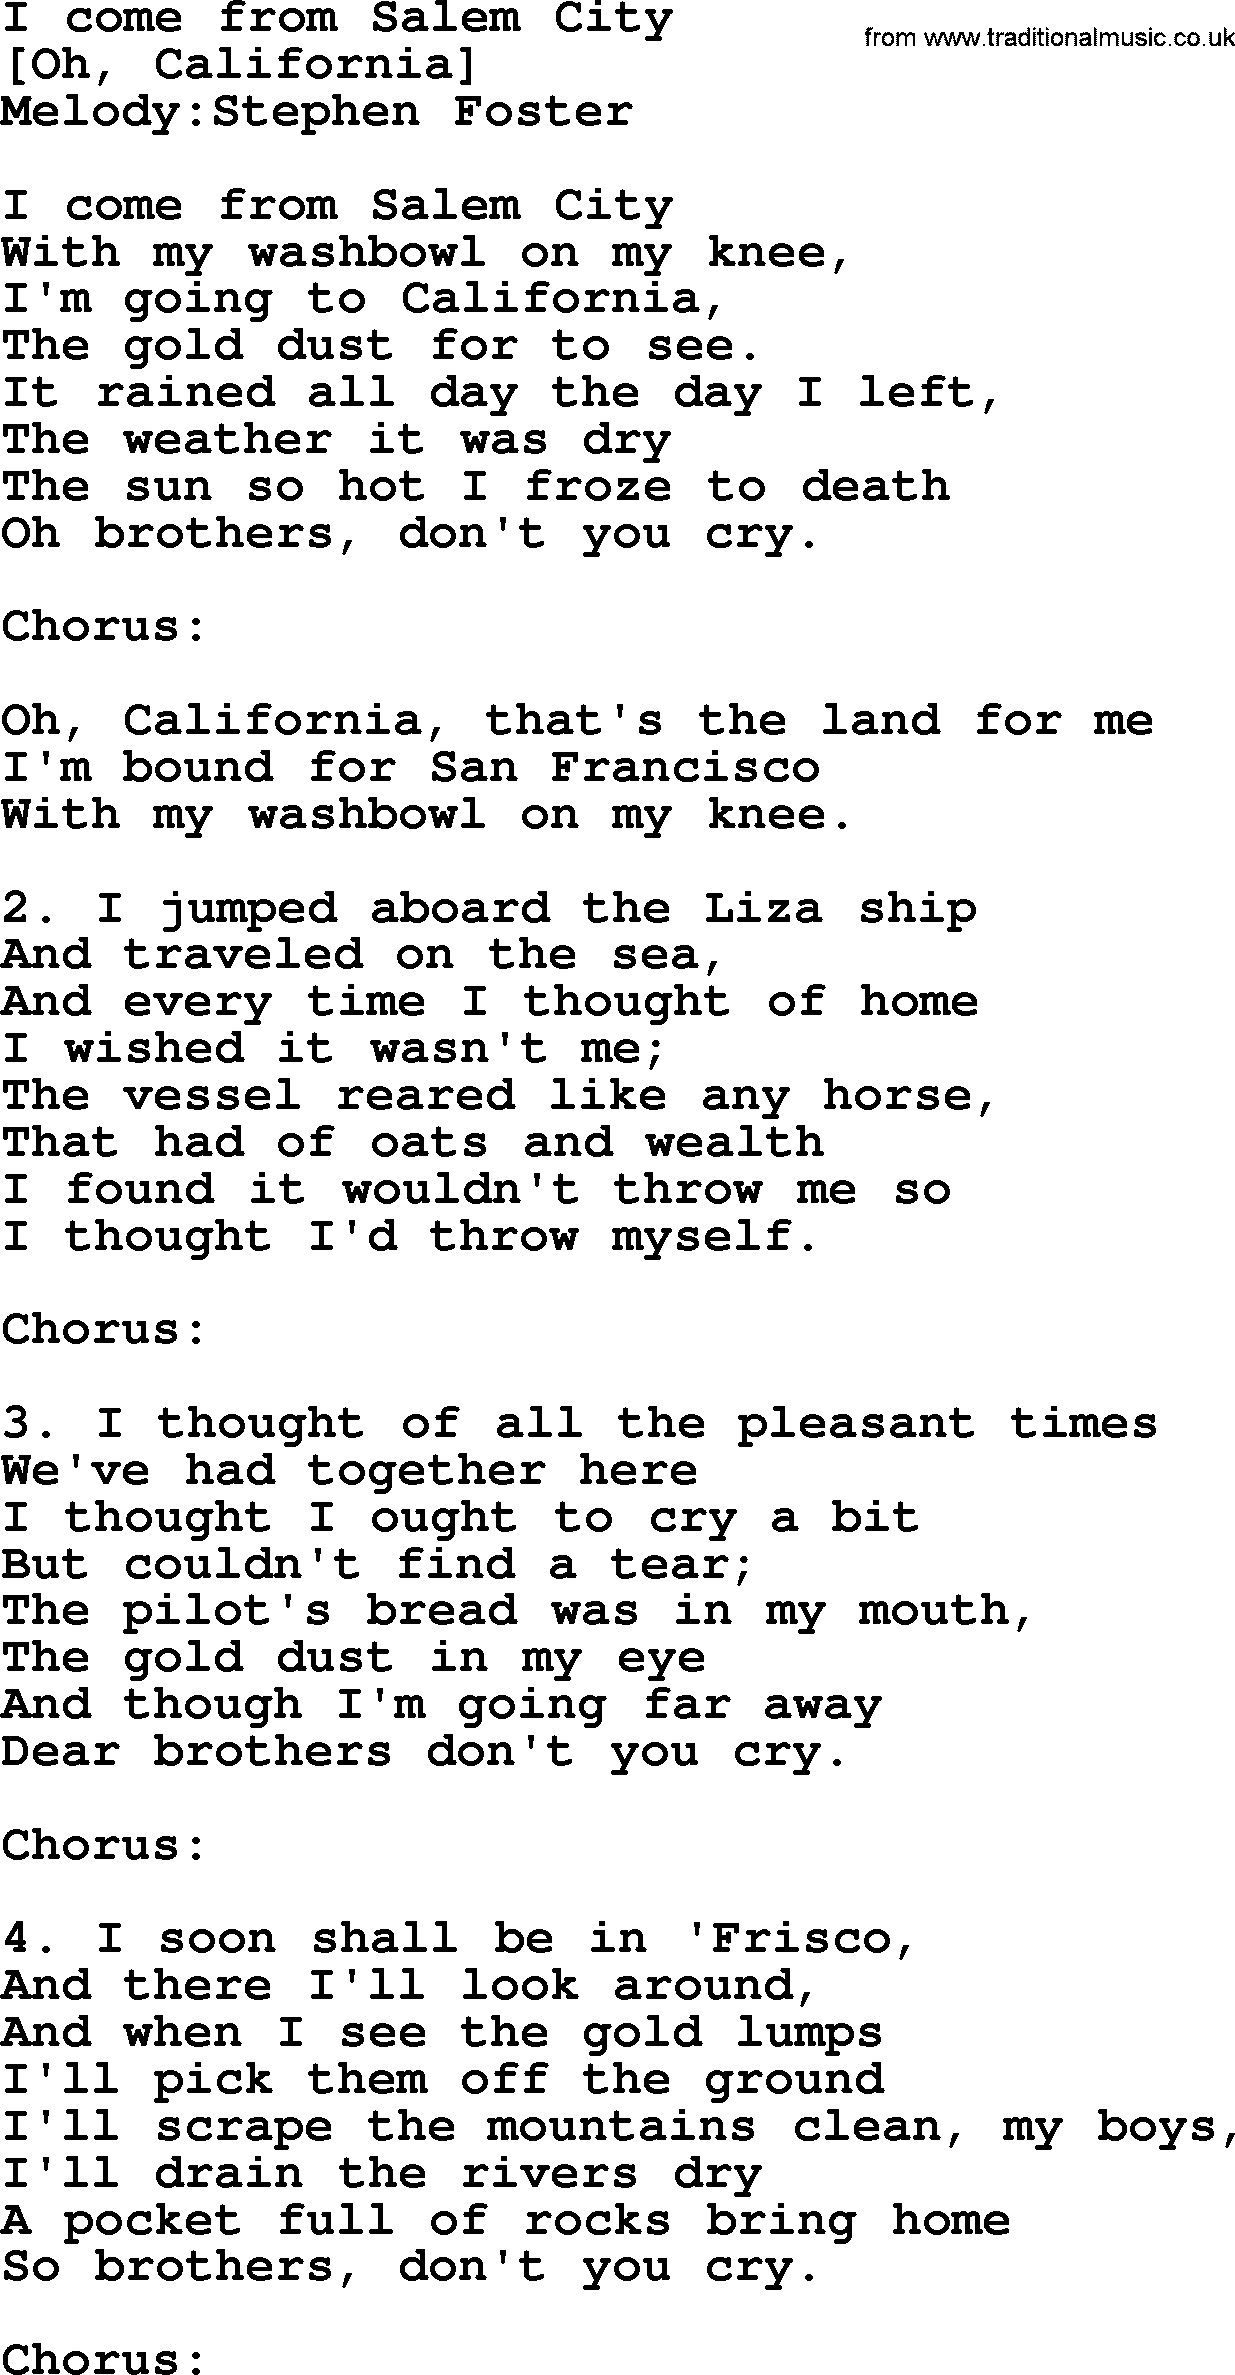 Old American Song: I Come From Salem City, lyrics